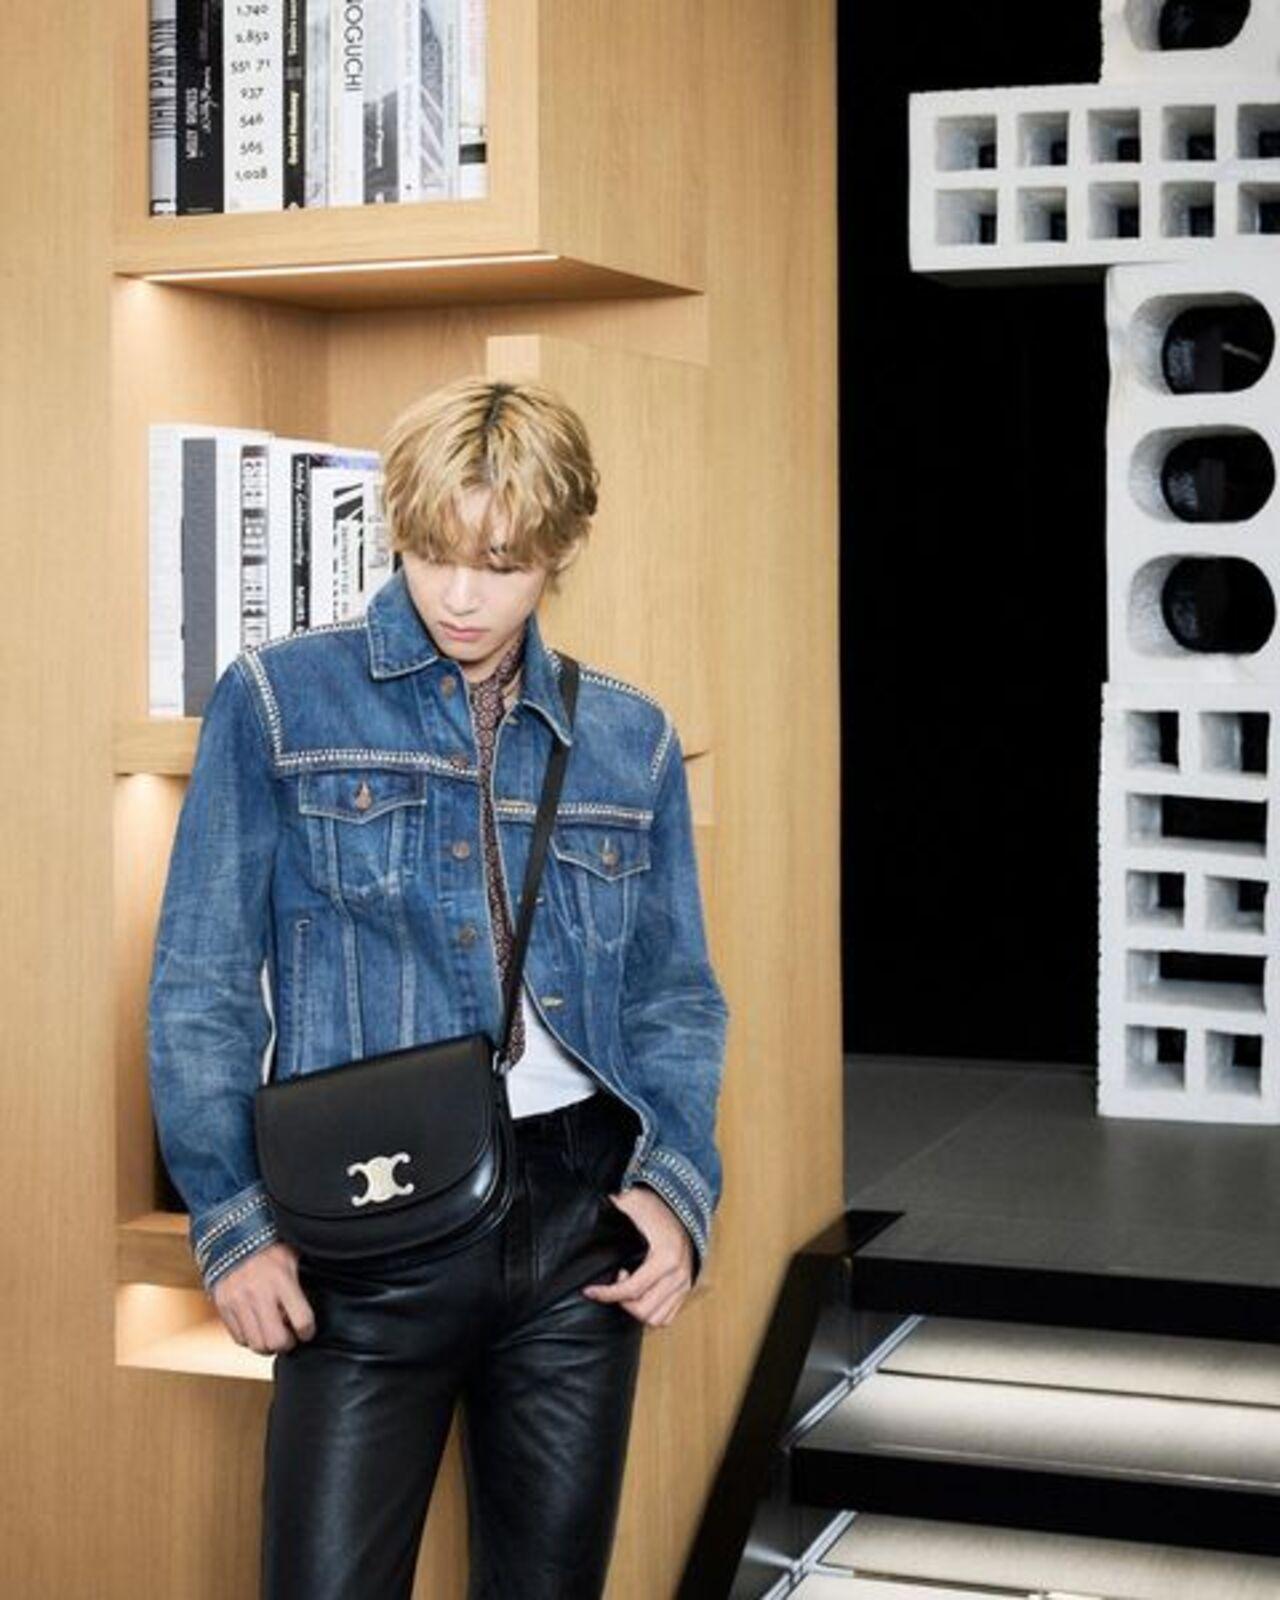 WATCH: BTS' V Asks Crowd Of Fans To 'Calm Down' At CELINE Store In